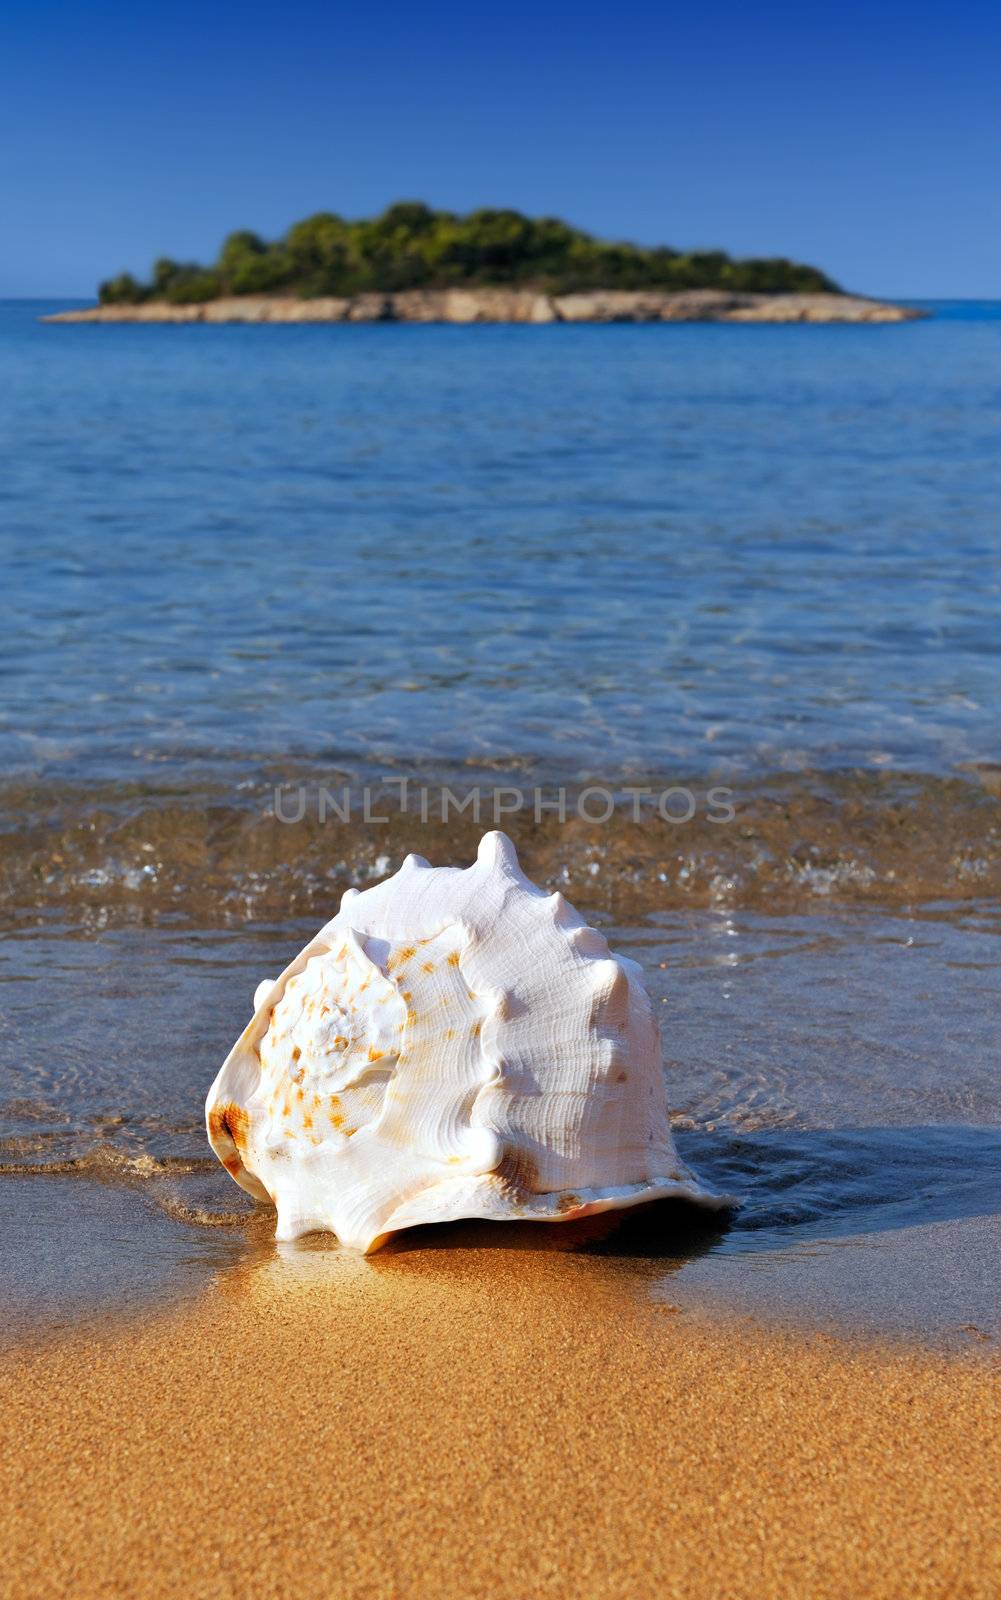 A seashell lying on a golden Mediterranean sandy beach with a small island in the background